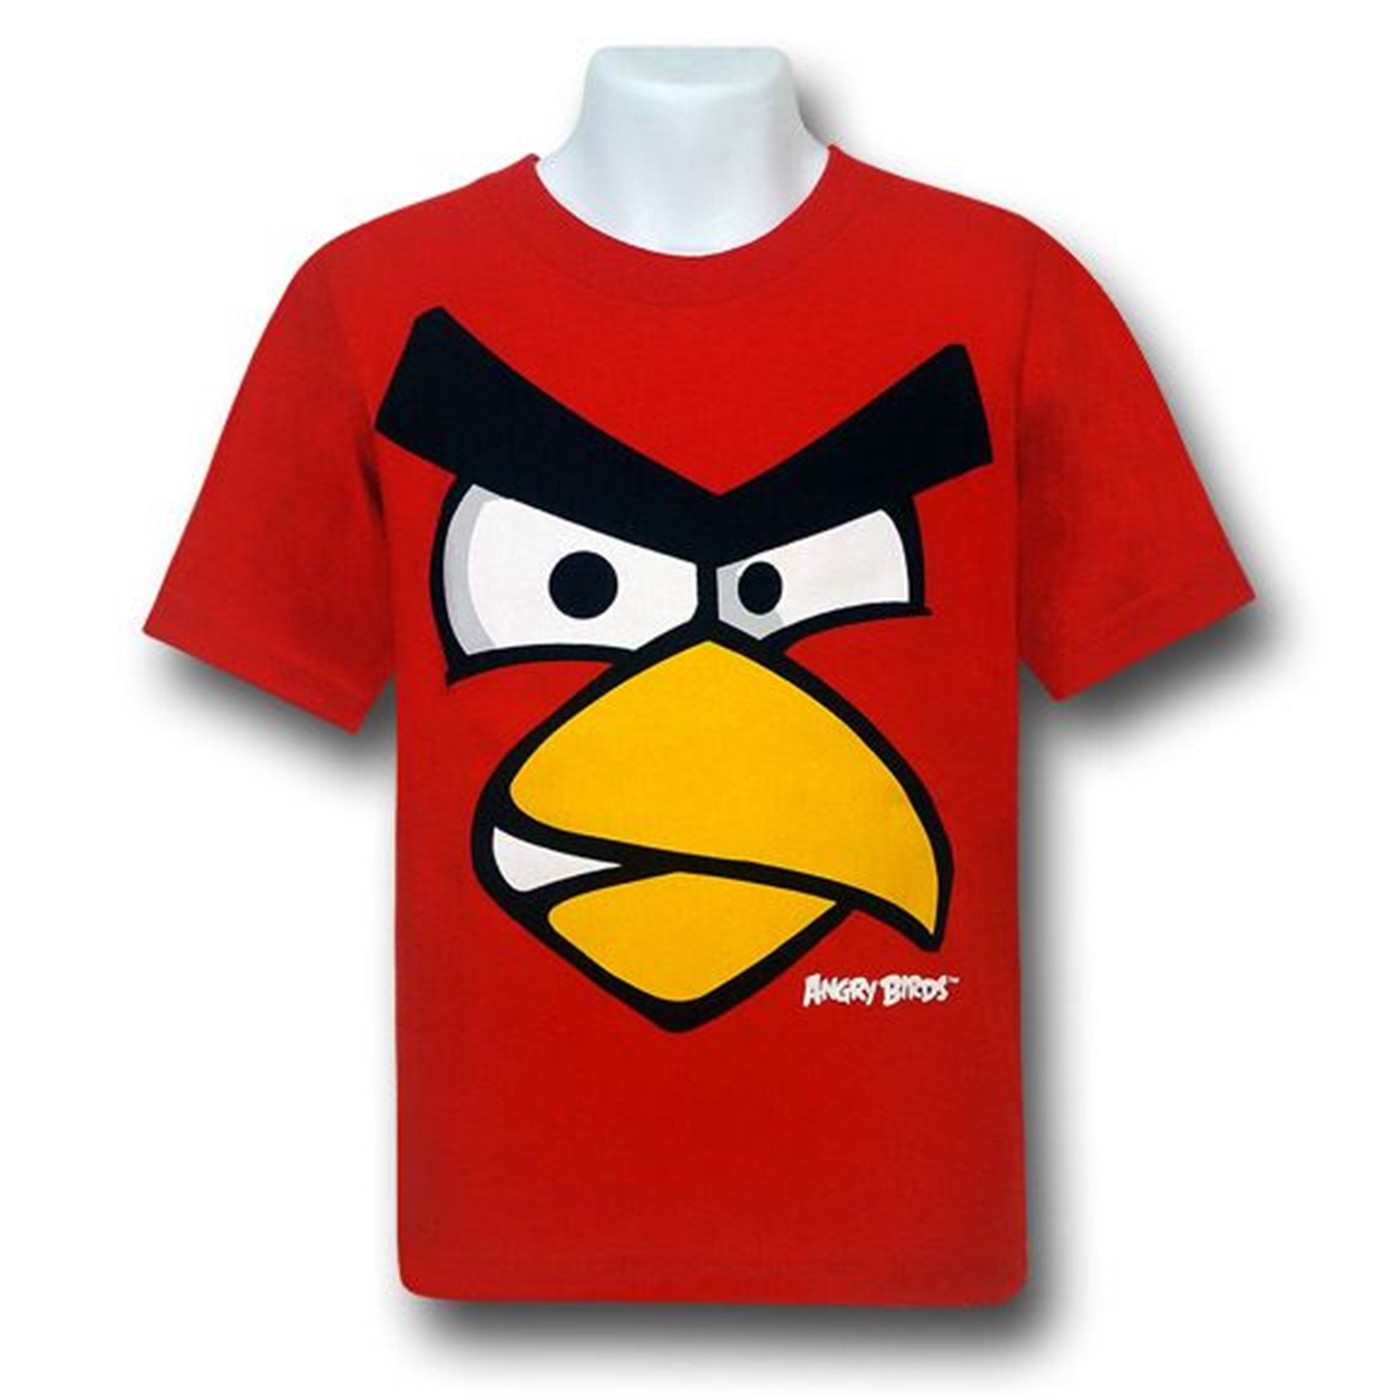 Angry Birds Shirts For Men